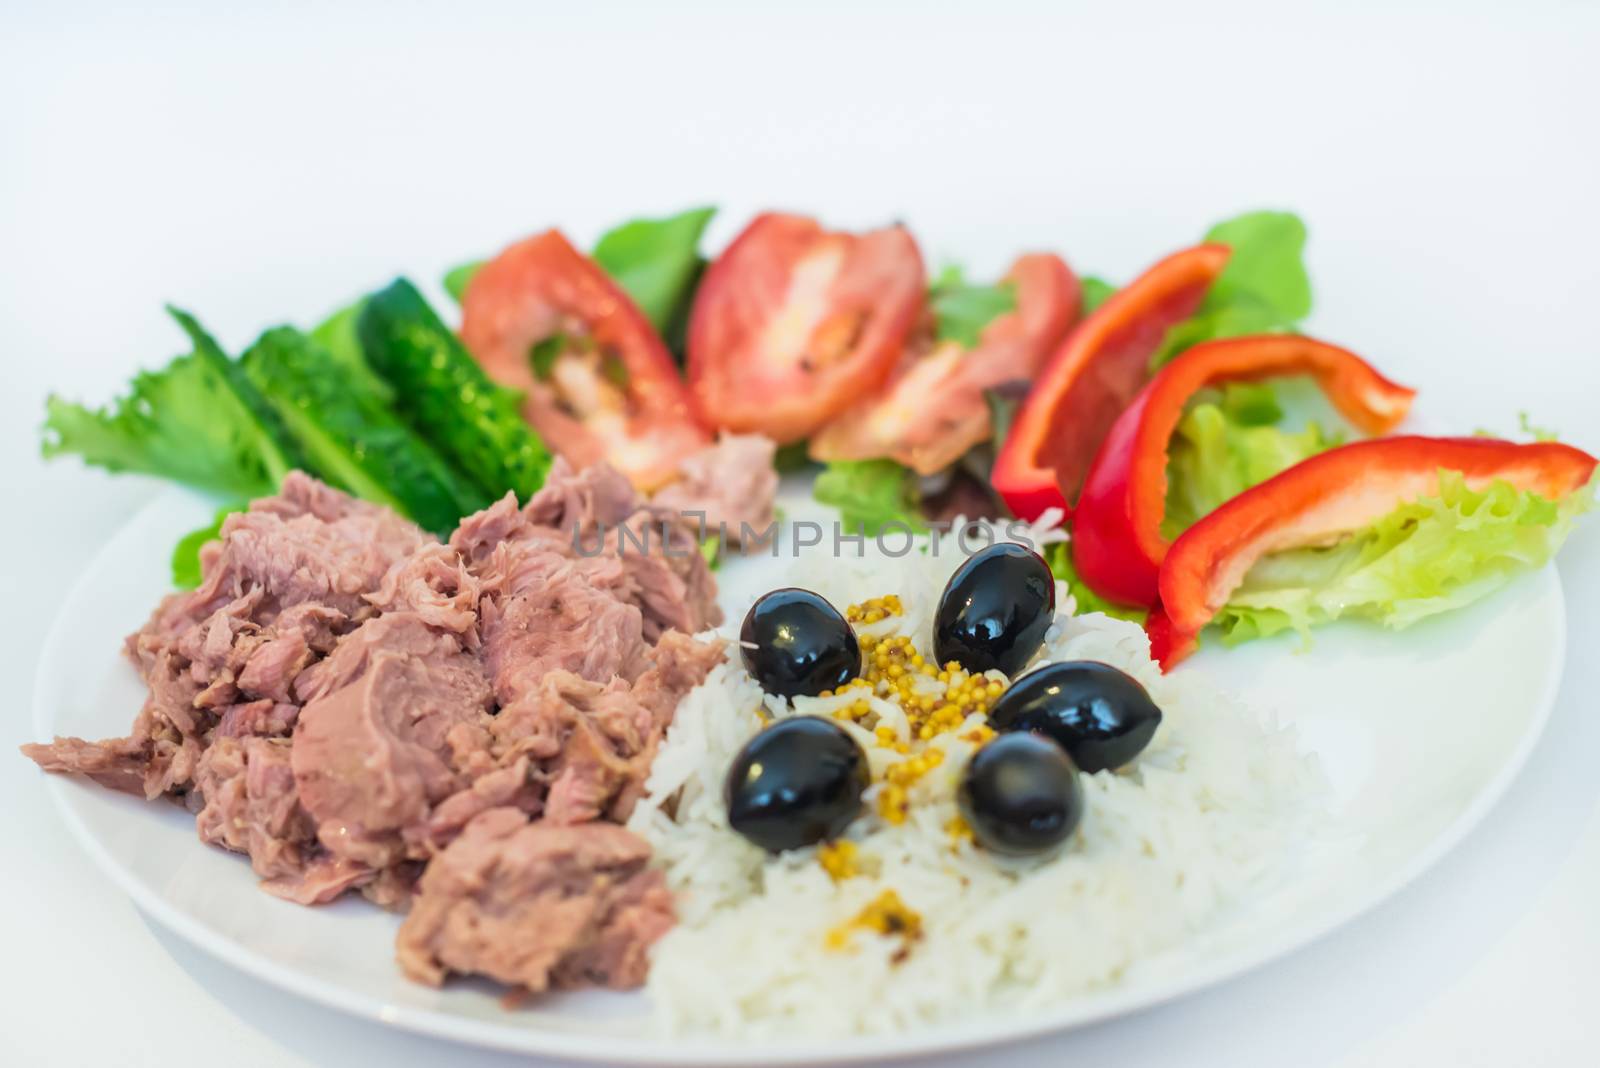 rice tuna chopped vegetables and olives in a white plate on a white background